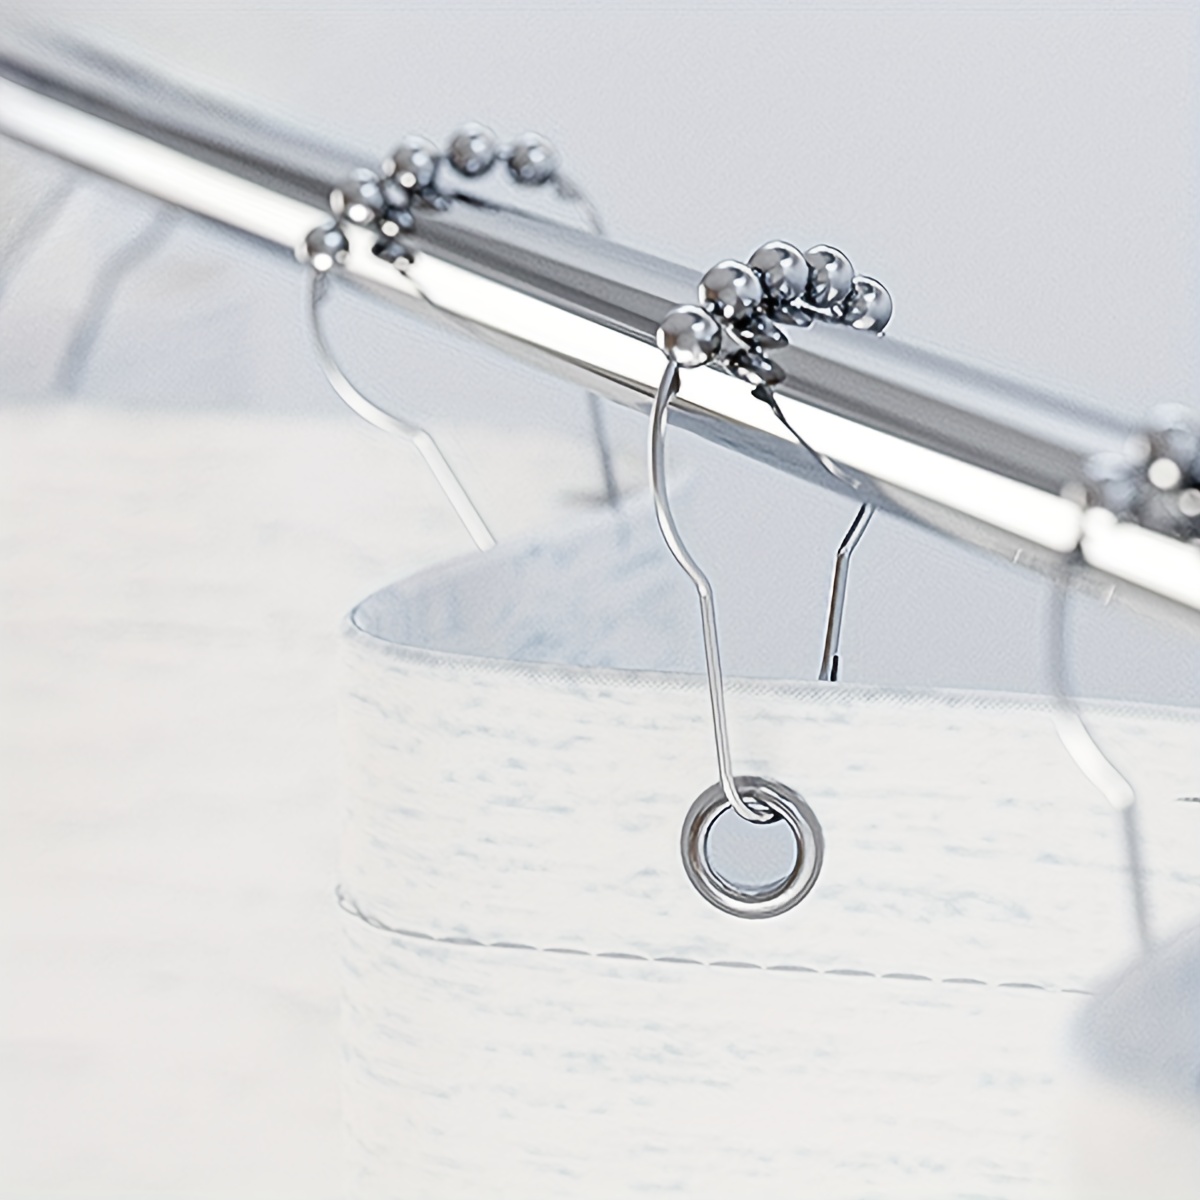 The Beaded Stainless Steel Bath Accessories